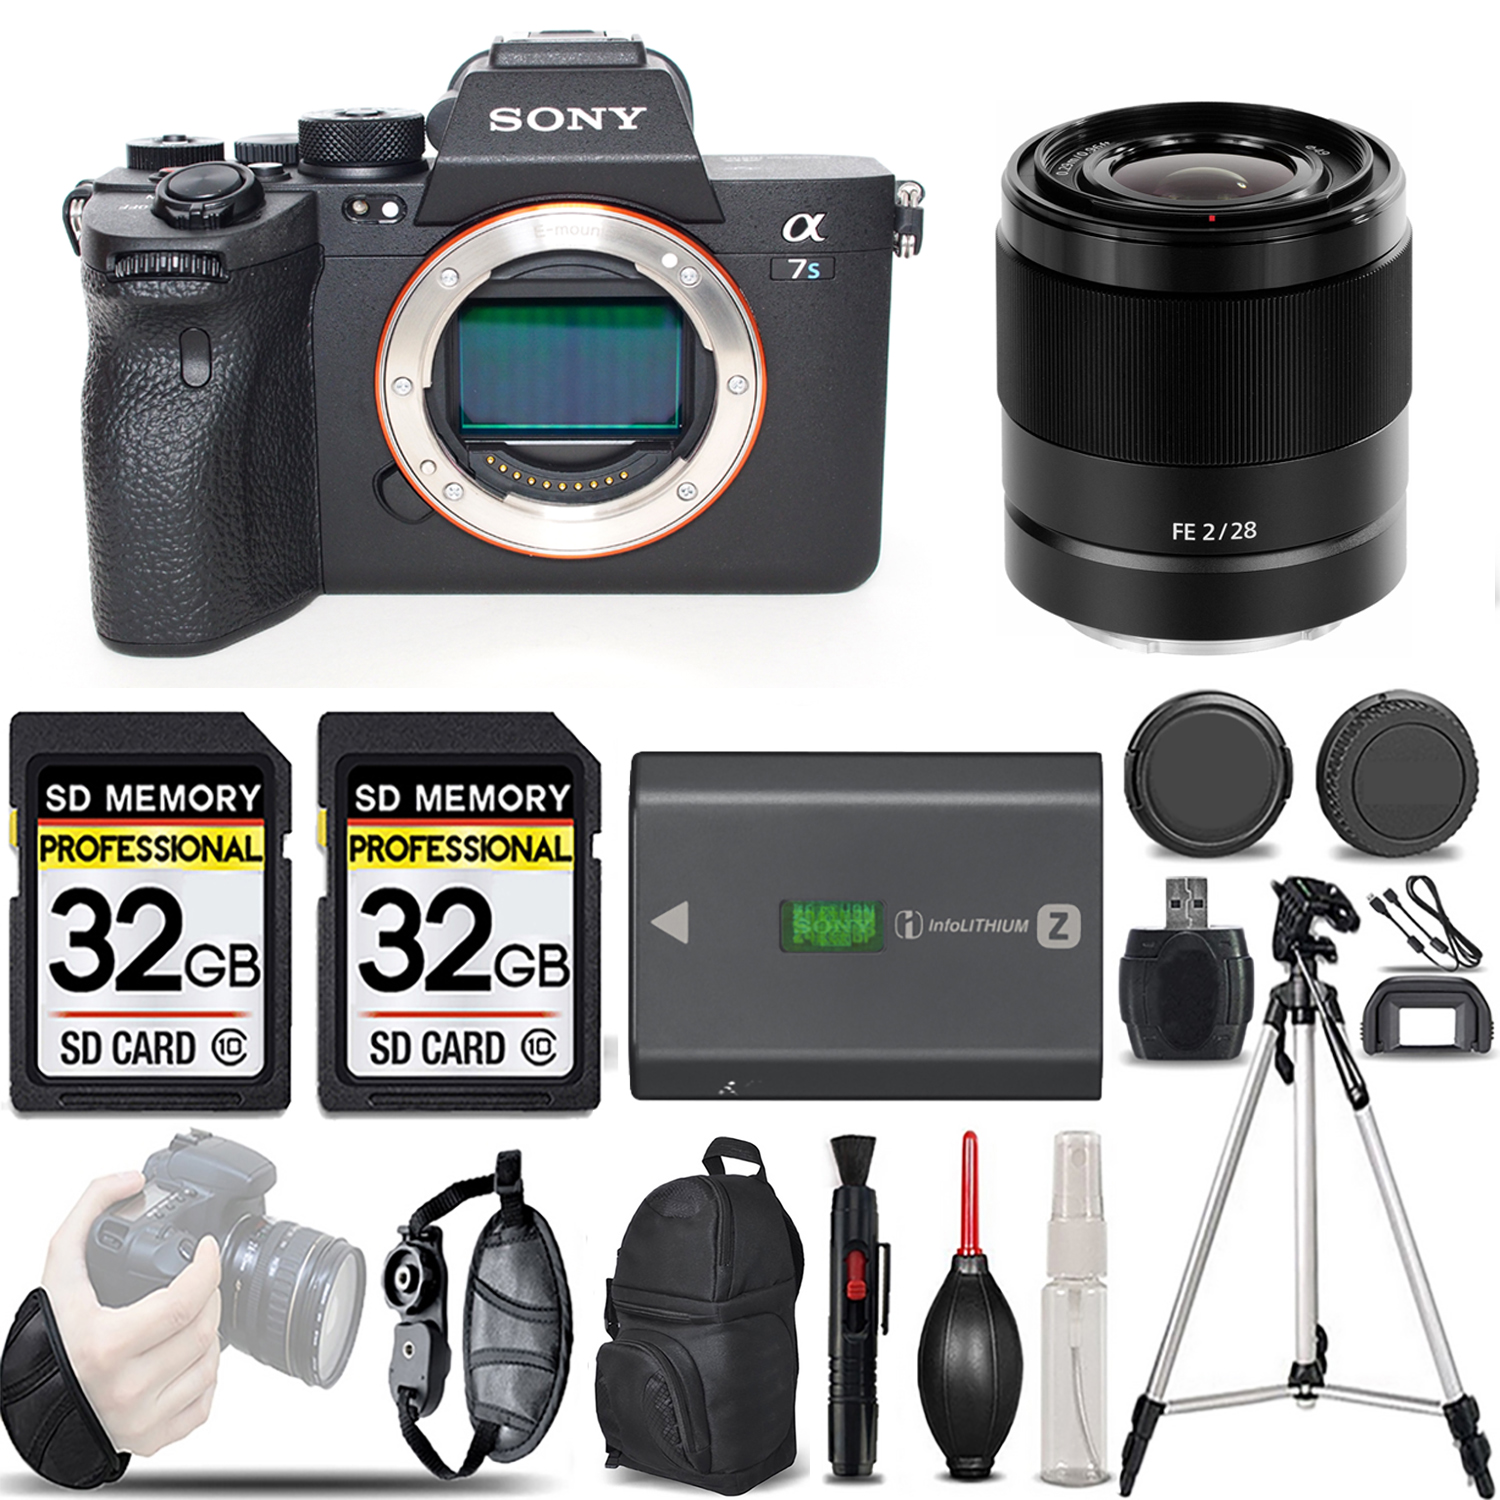 a7S III Mirrorless Camera + 28mm f/2 Lens + Extra Battery + 64GB -Basic Kit *FREE SHIPPING*